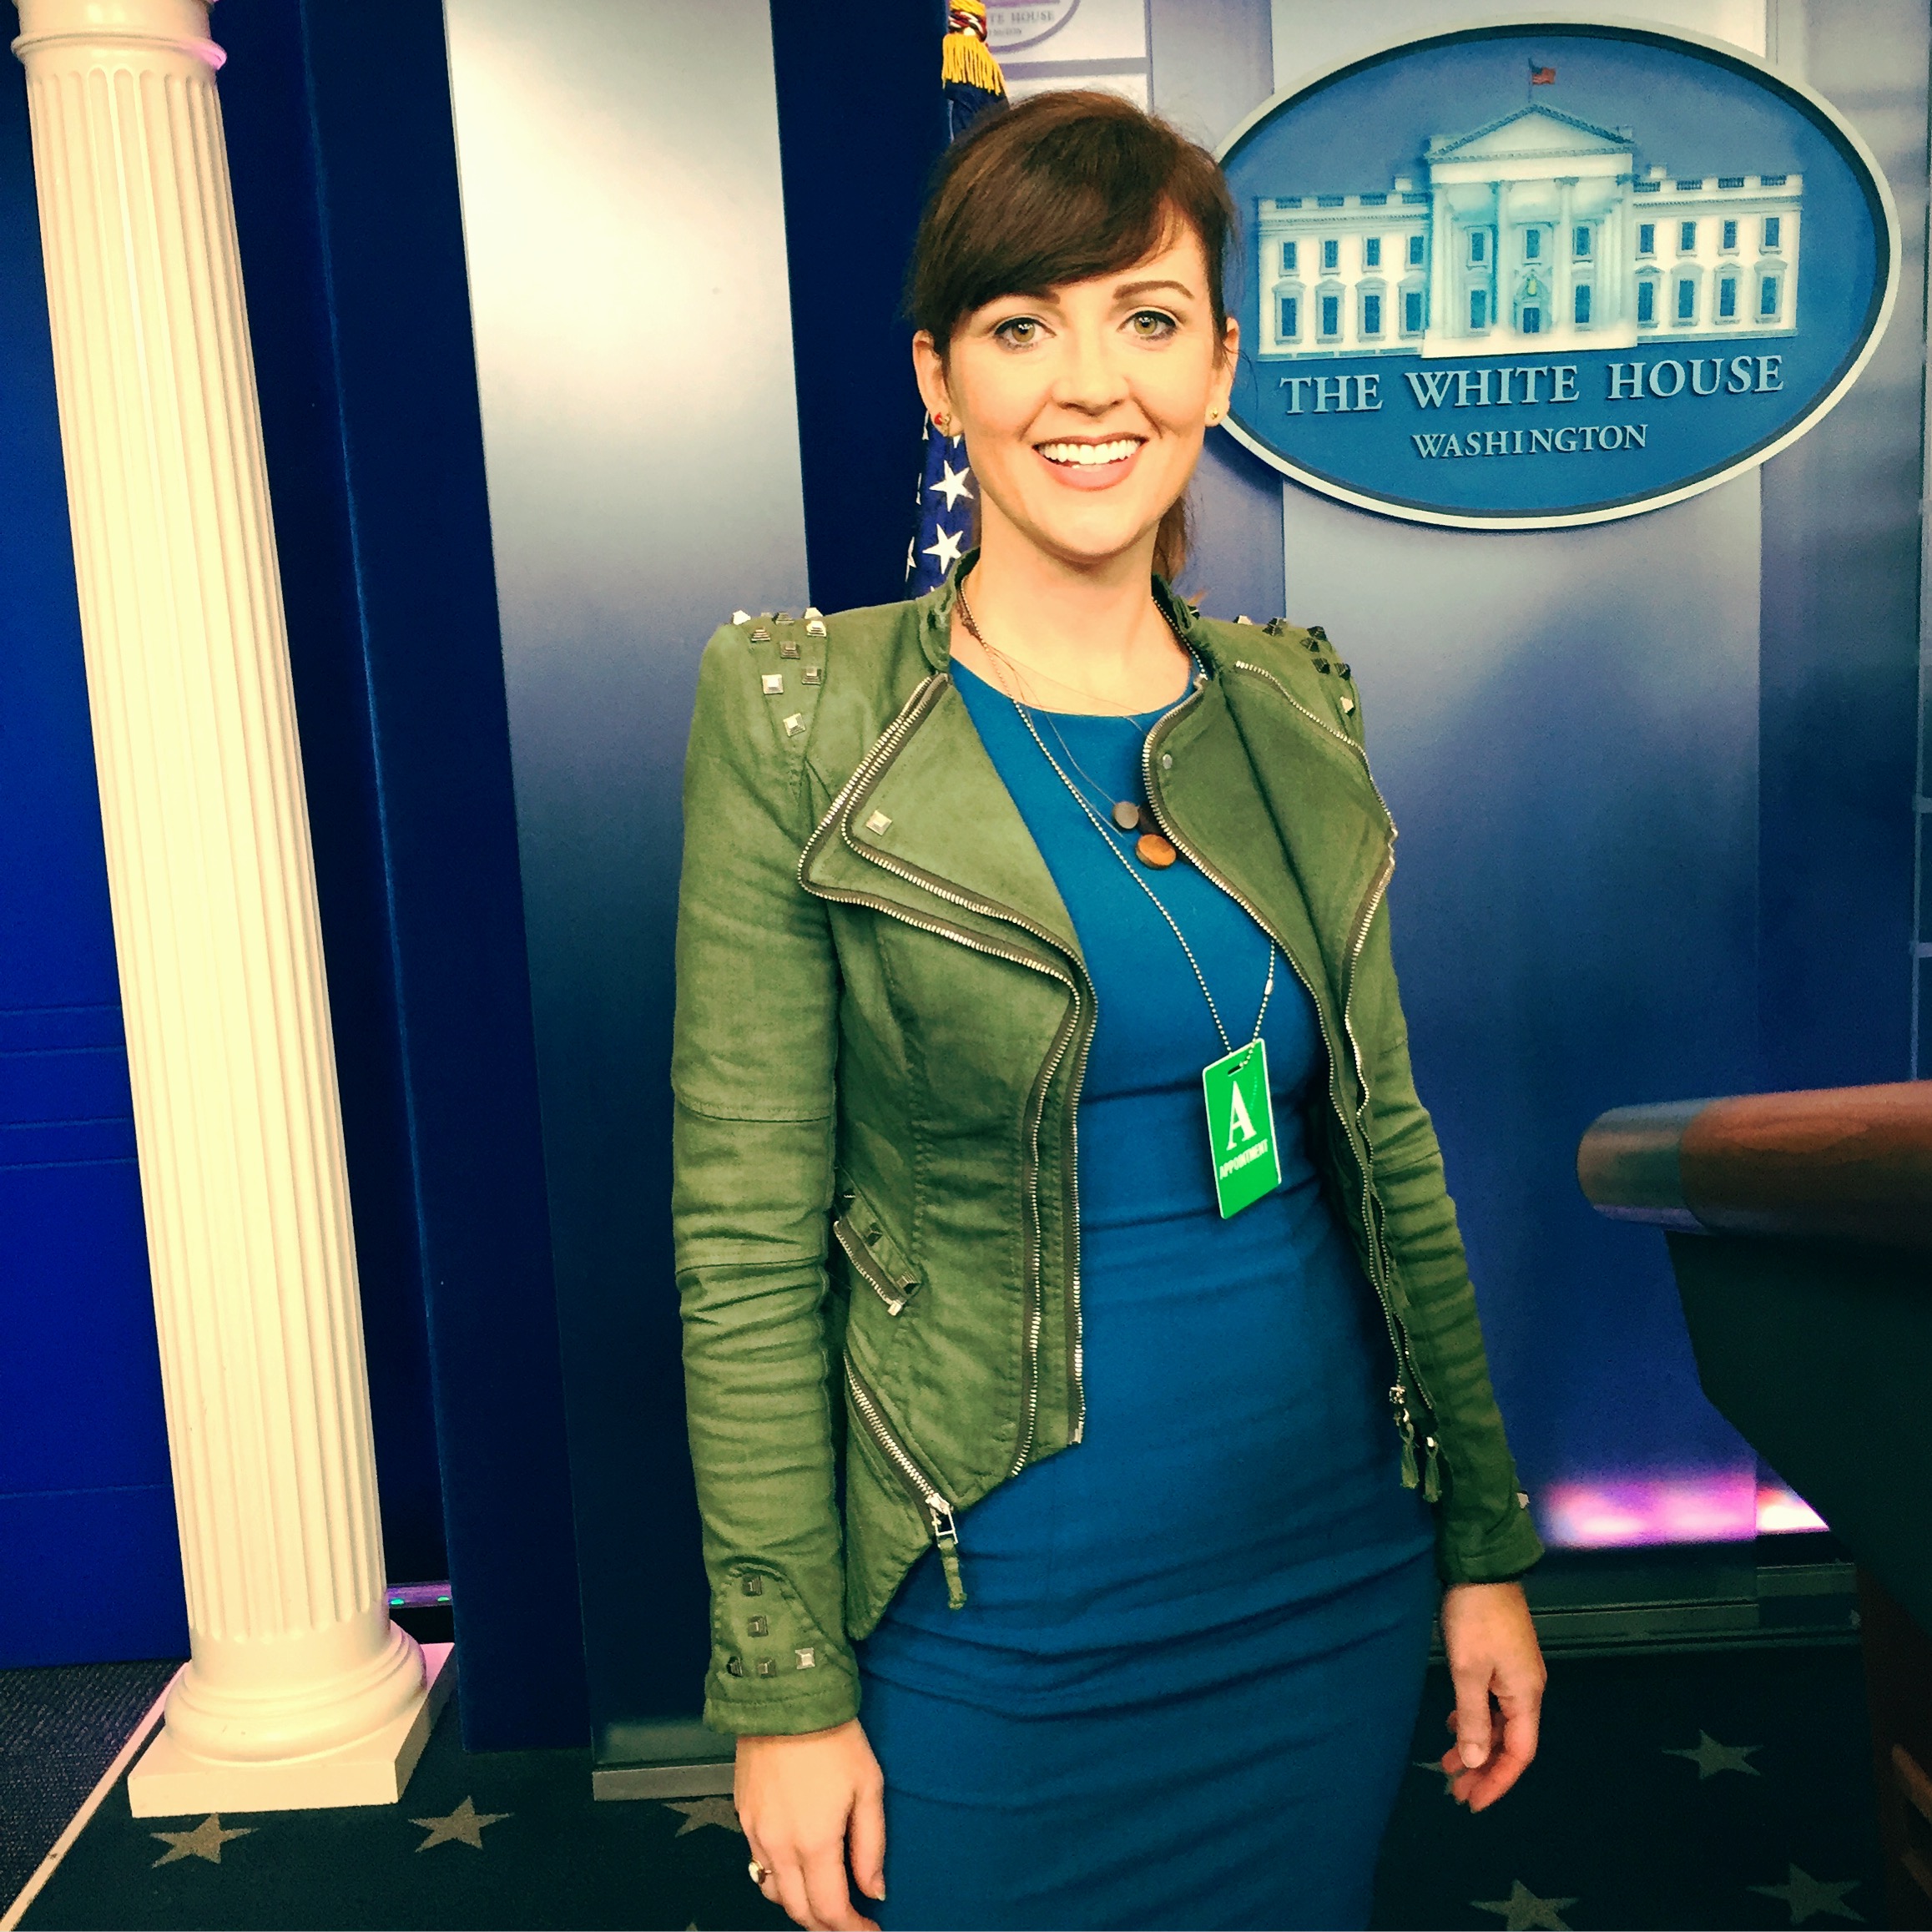 Channeling my inner CJ Cregg, I posed by the podium in the press room at the White House. 